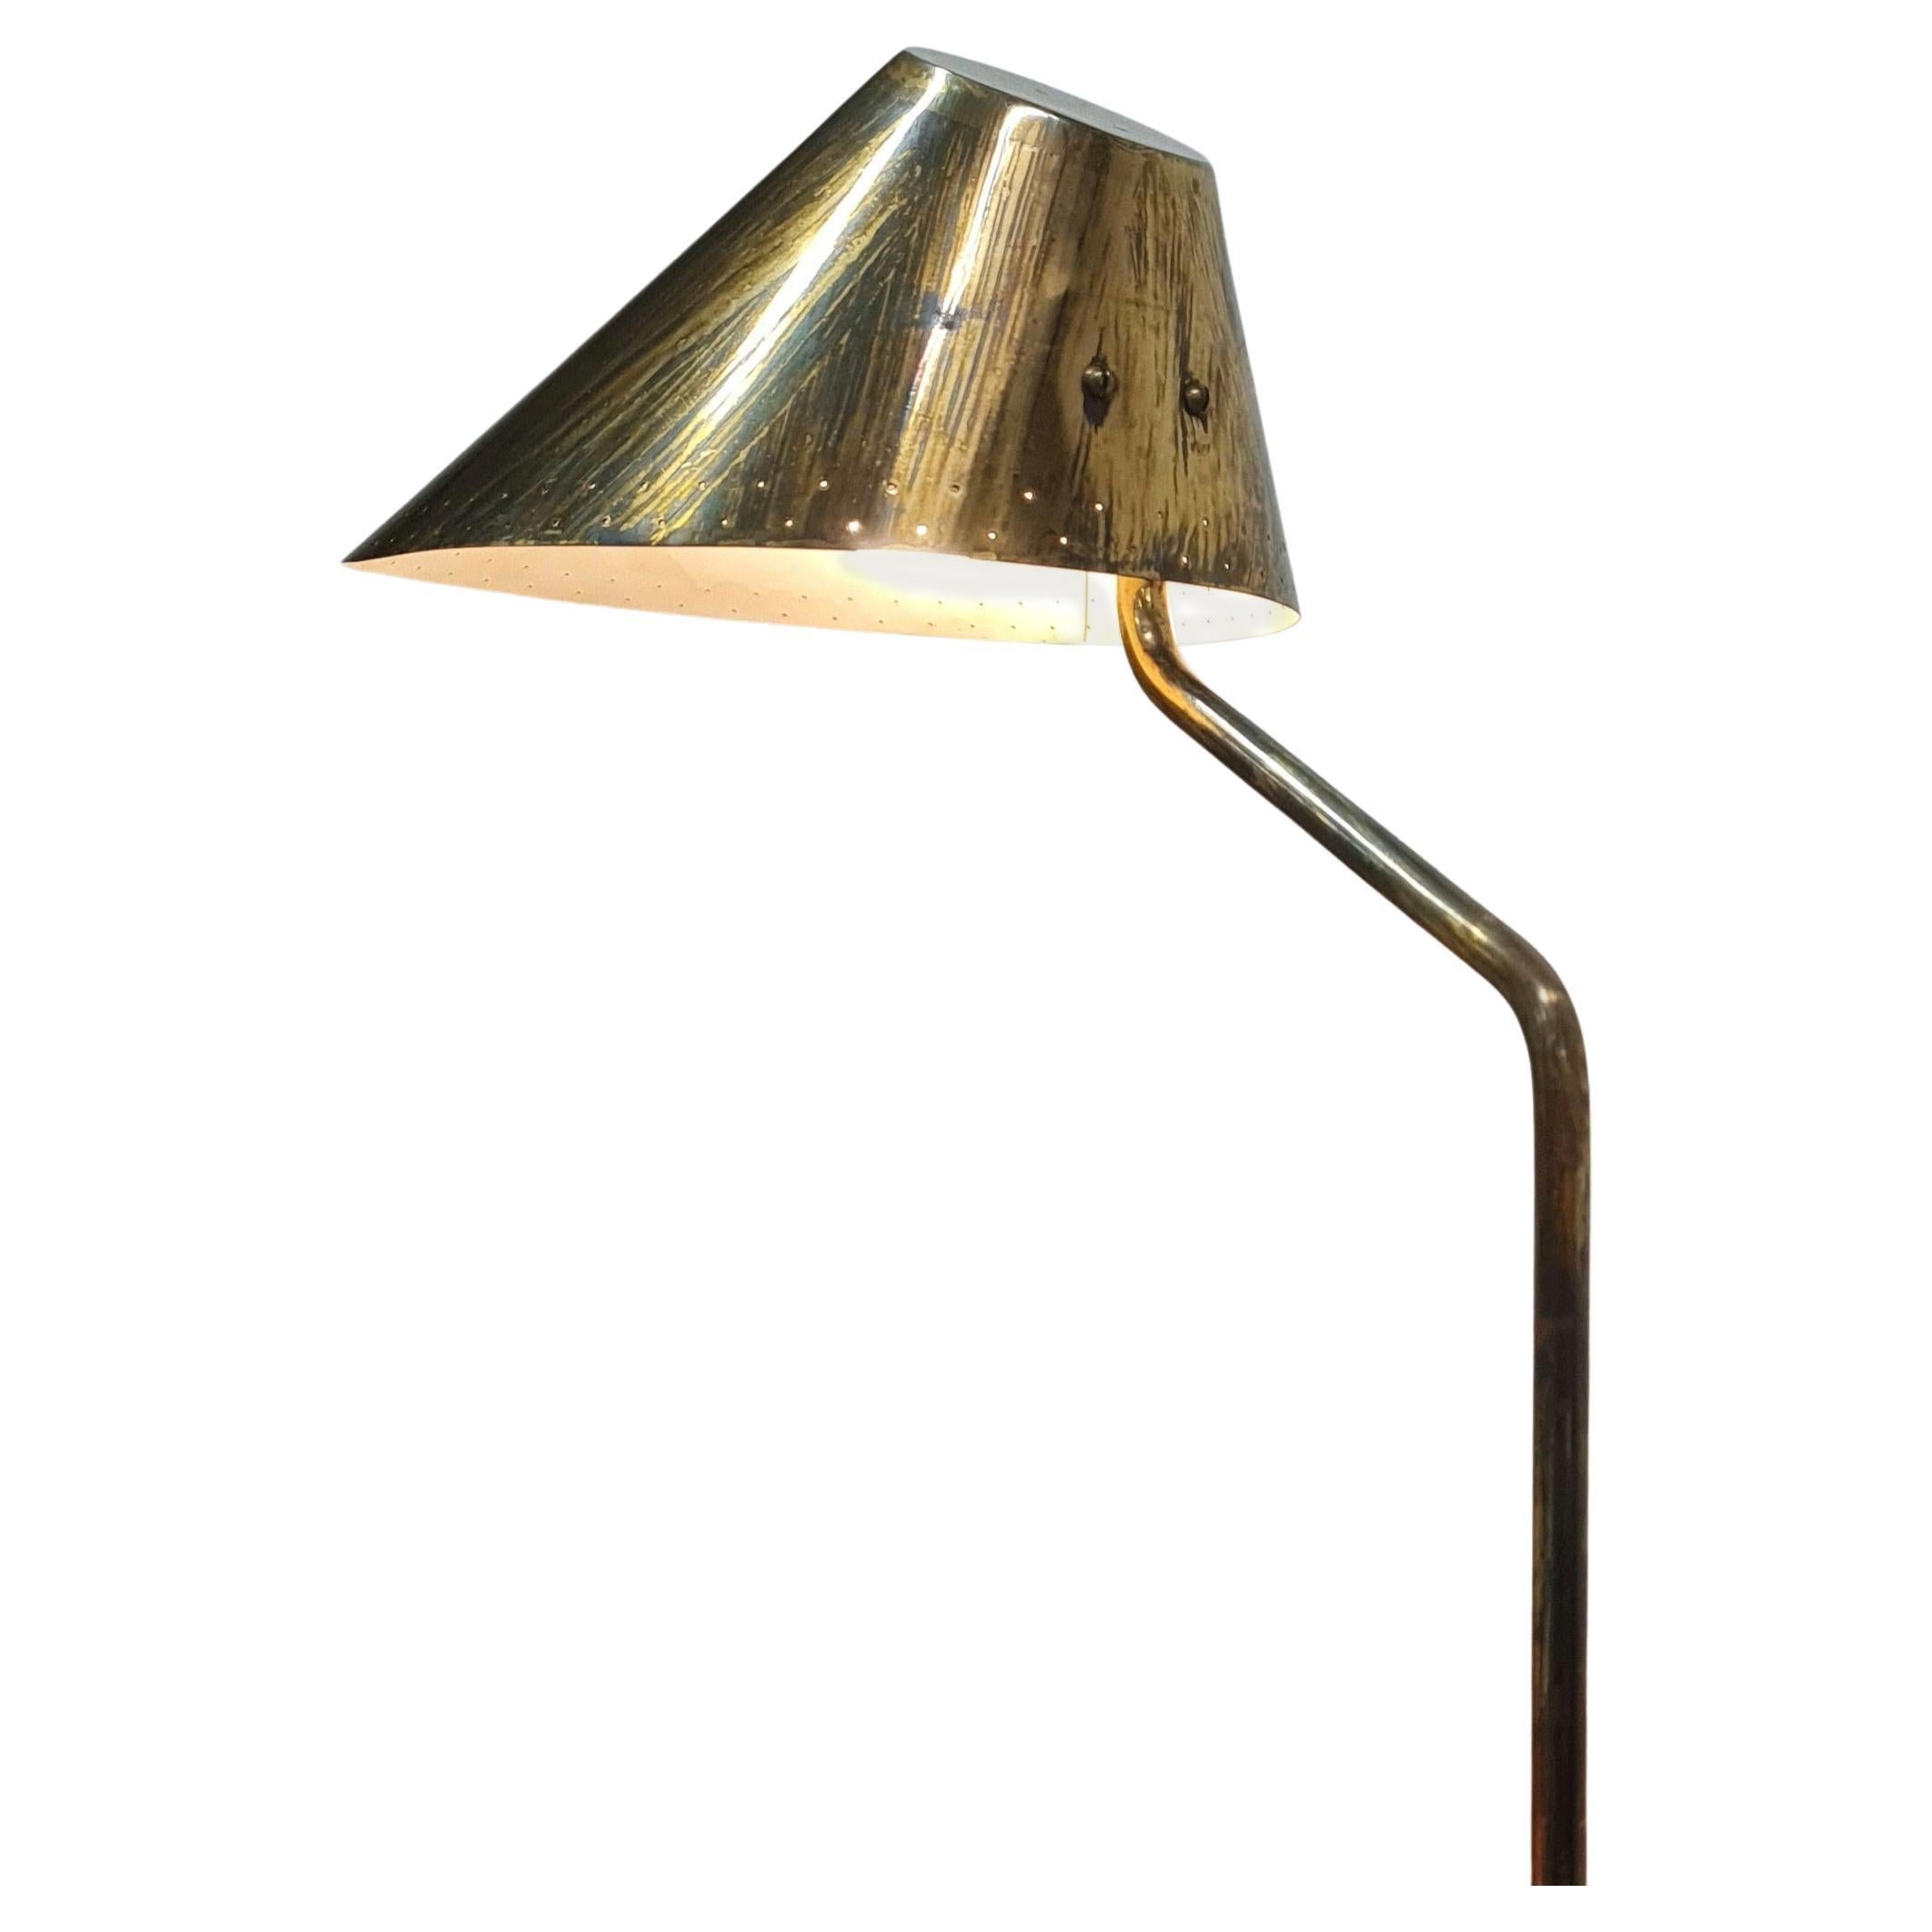 Paavo Tynell Finnair Table Mounted Brass Lamp, Taito, 1950s. For Sale